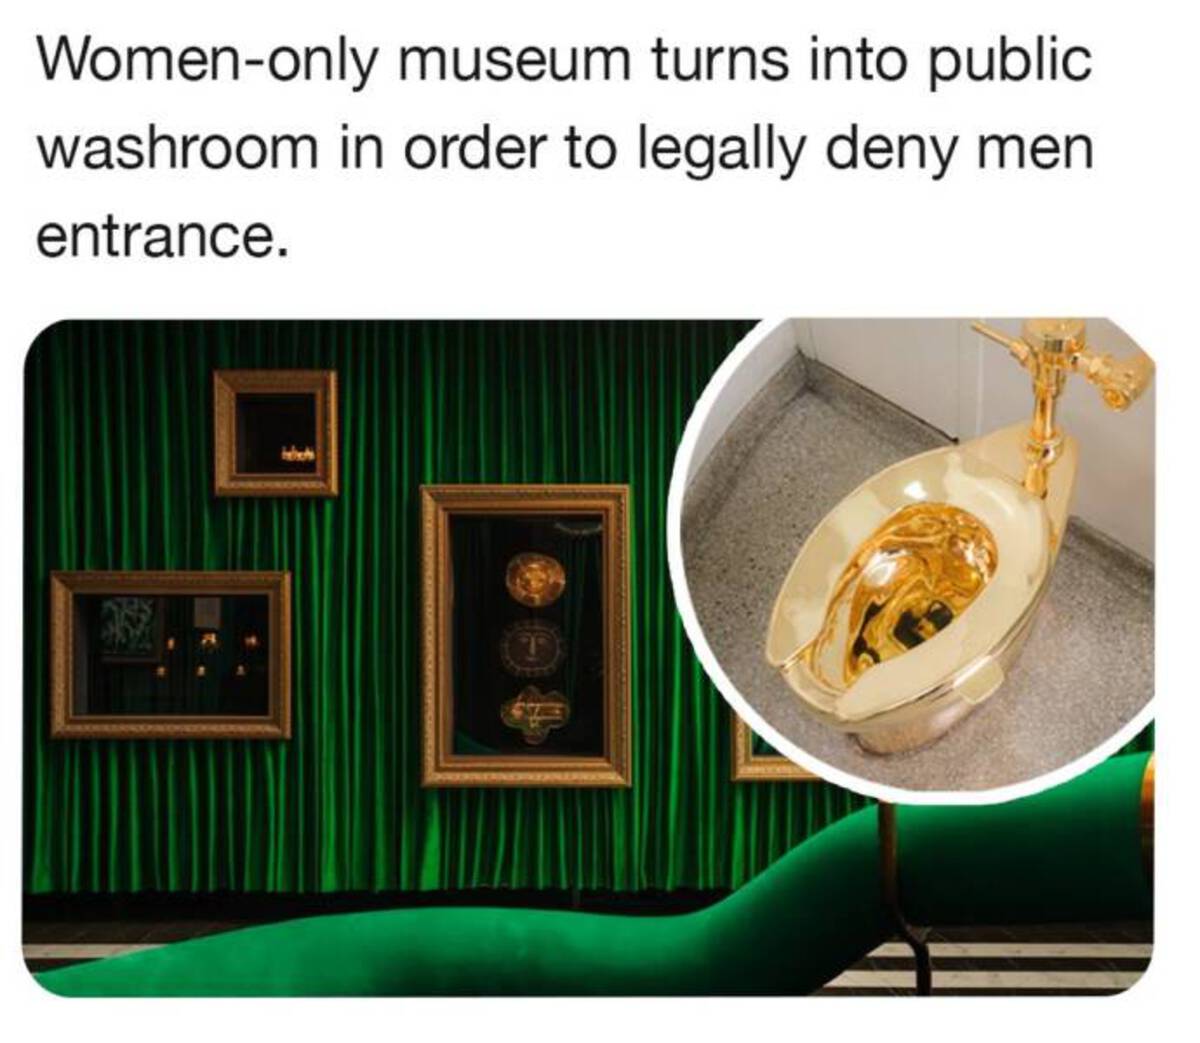 mona women only exhibit - Womenonly museum turns into public washroom in order to legally deny men entrance. B